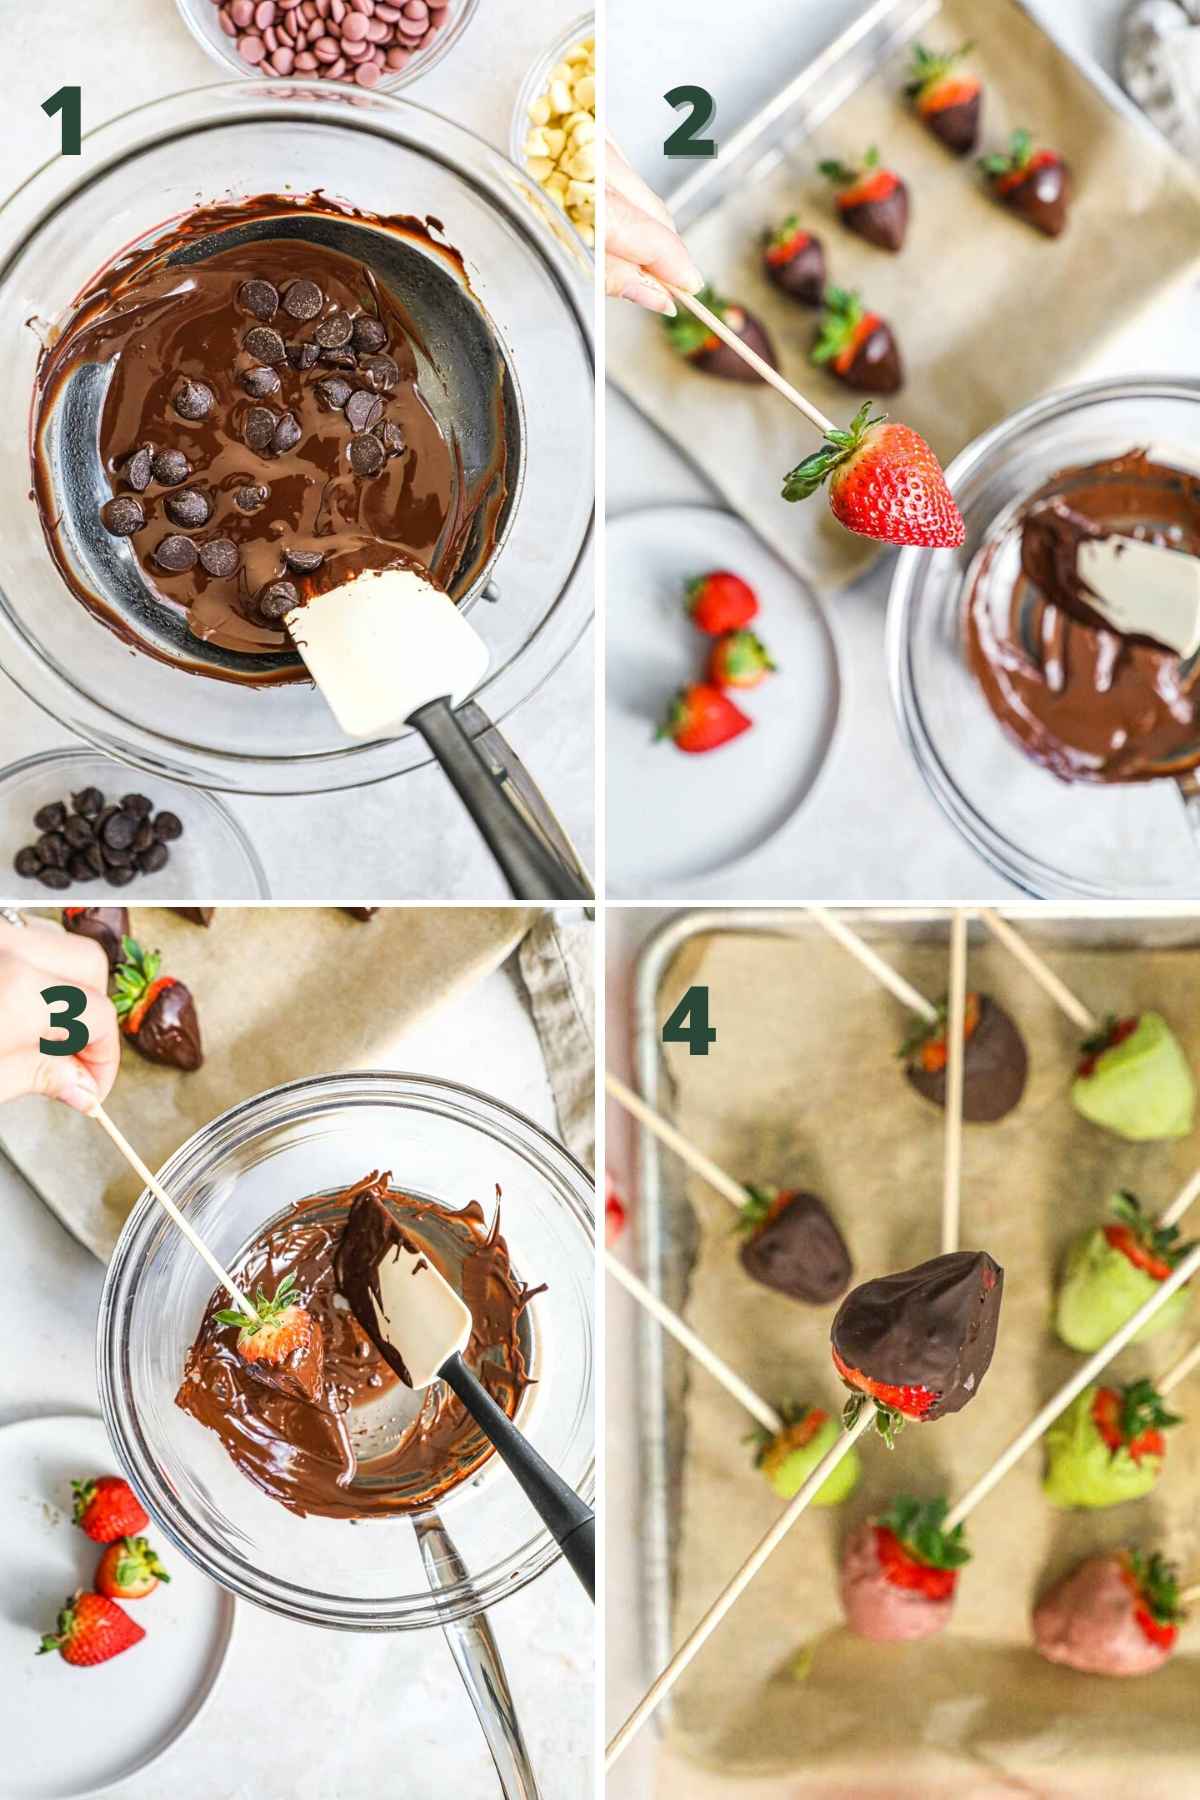 Steps to make chocolate-covered strawberry bouquet, including melting the chocolate, placing the berries on skewers, dipping in chocolate, and setting the chocoalte.